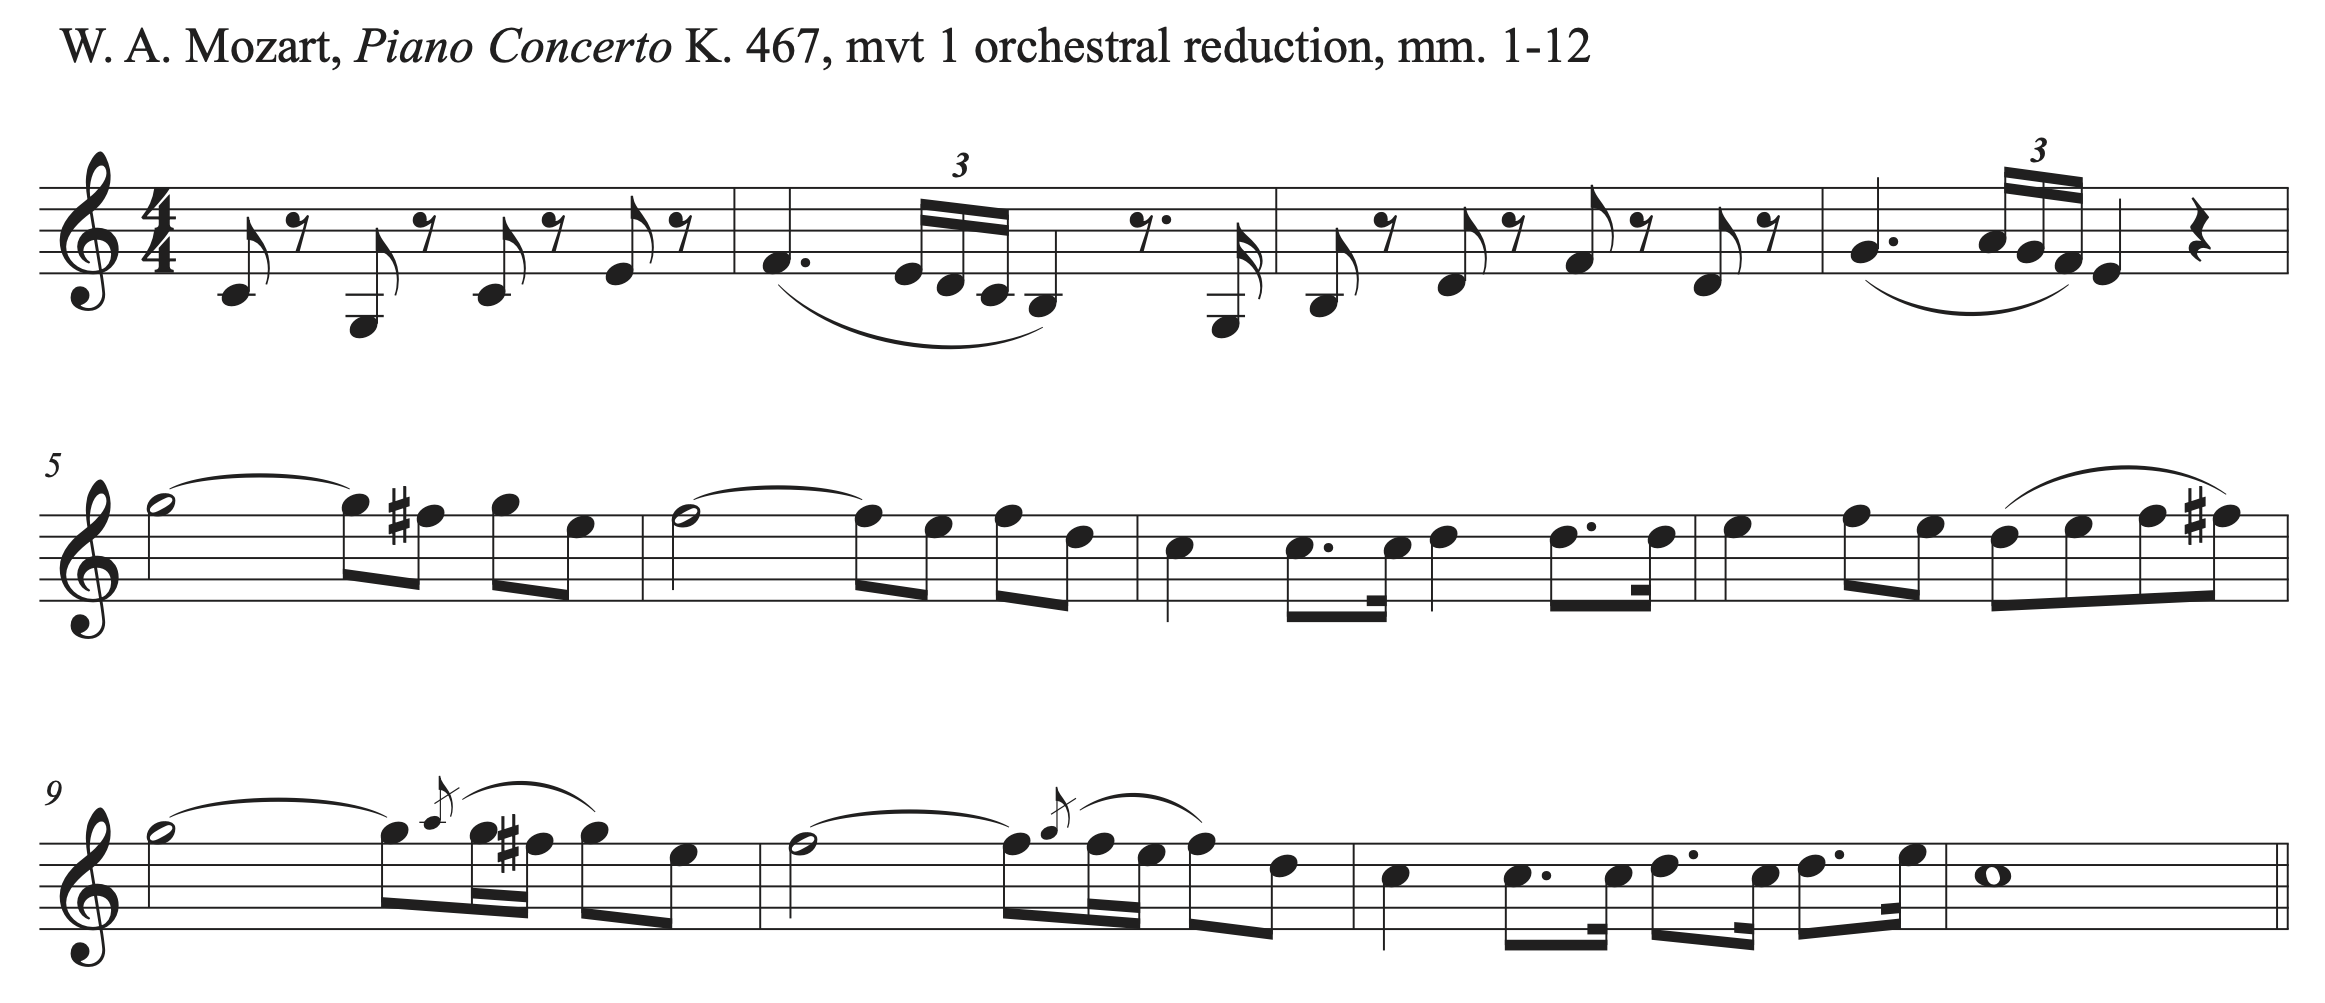 Excerpt from Mozart's Piano Concerto K. 467, movement 1, measures 1 to 12.